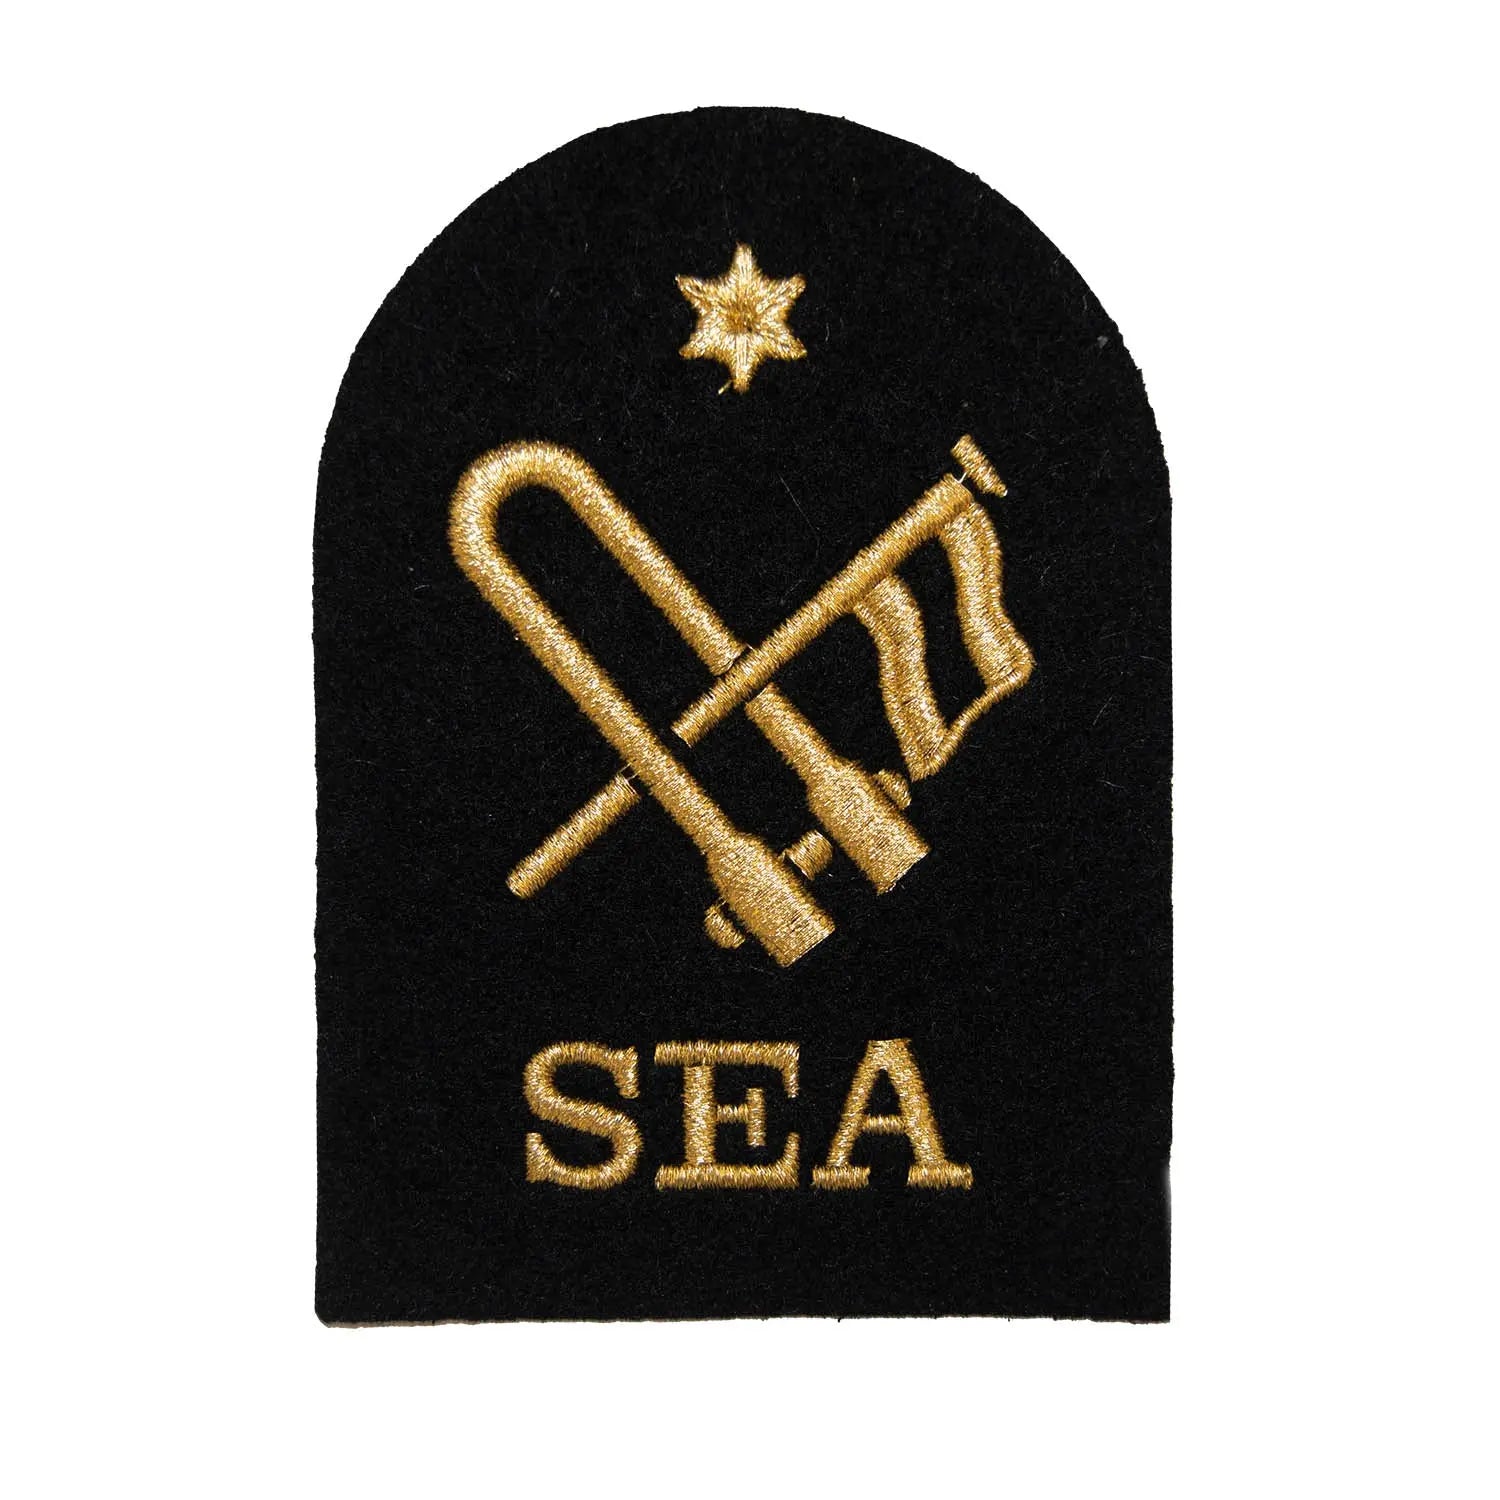 Seaman Specialist Able Rate Royal Navy Qualification Badges wyedean